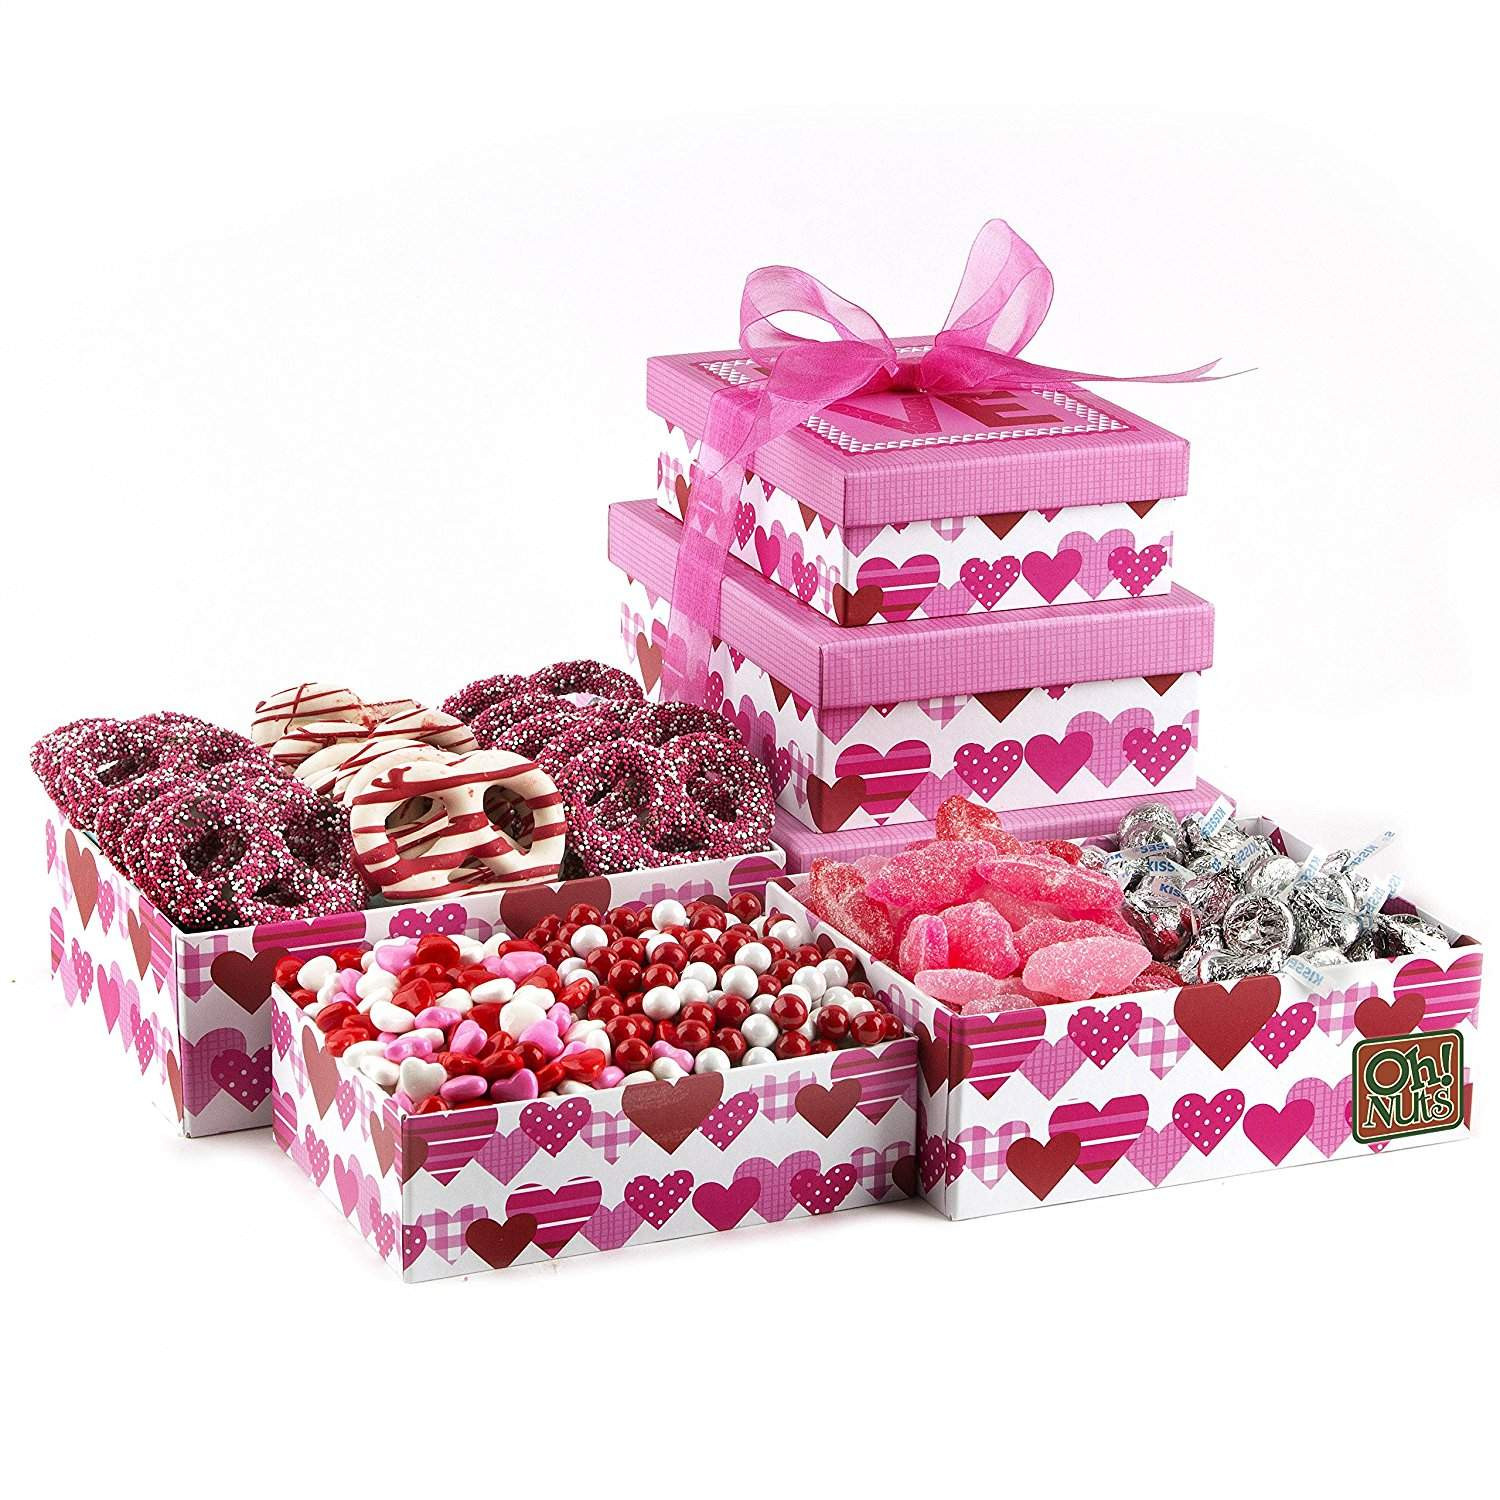 Valentines Day Candy Gift
 Top 10 Best Valentine’s Day Candy Gift Ideas